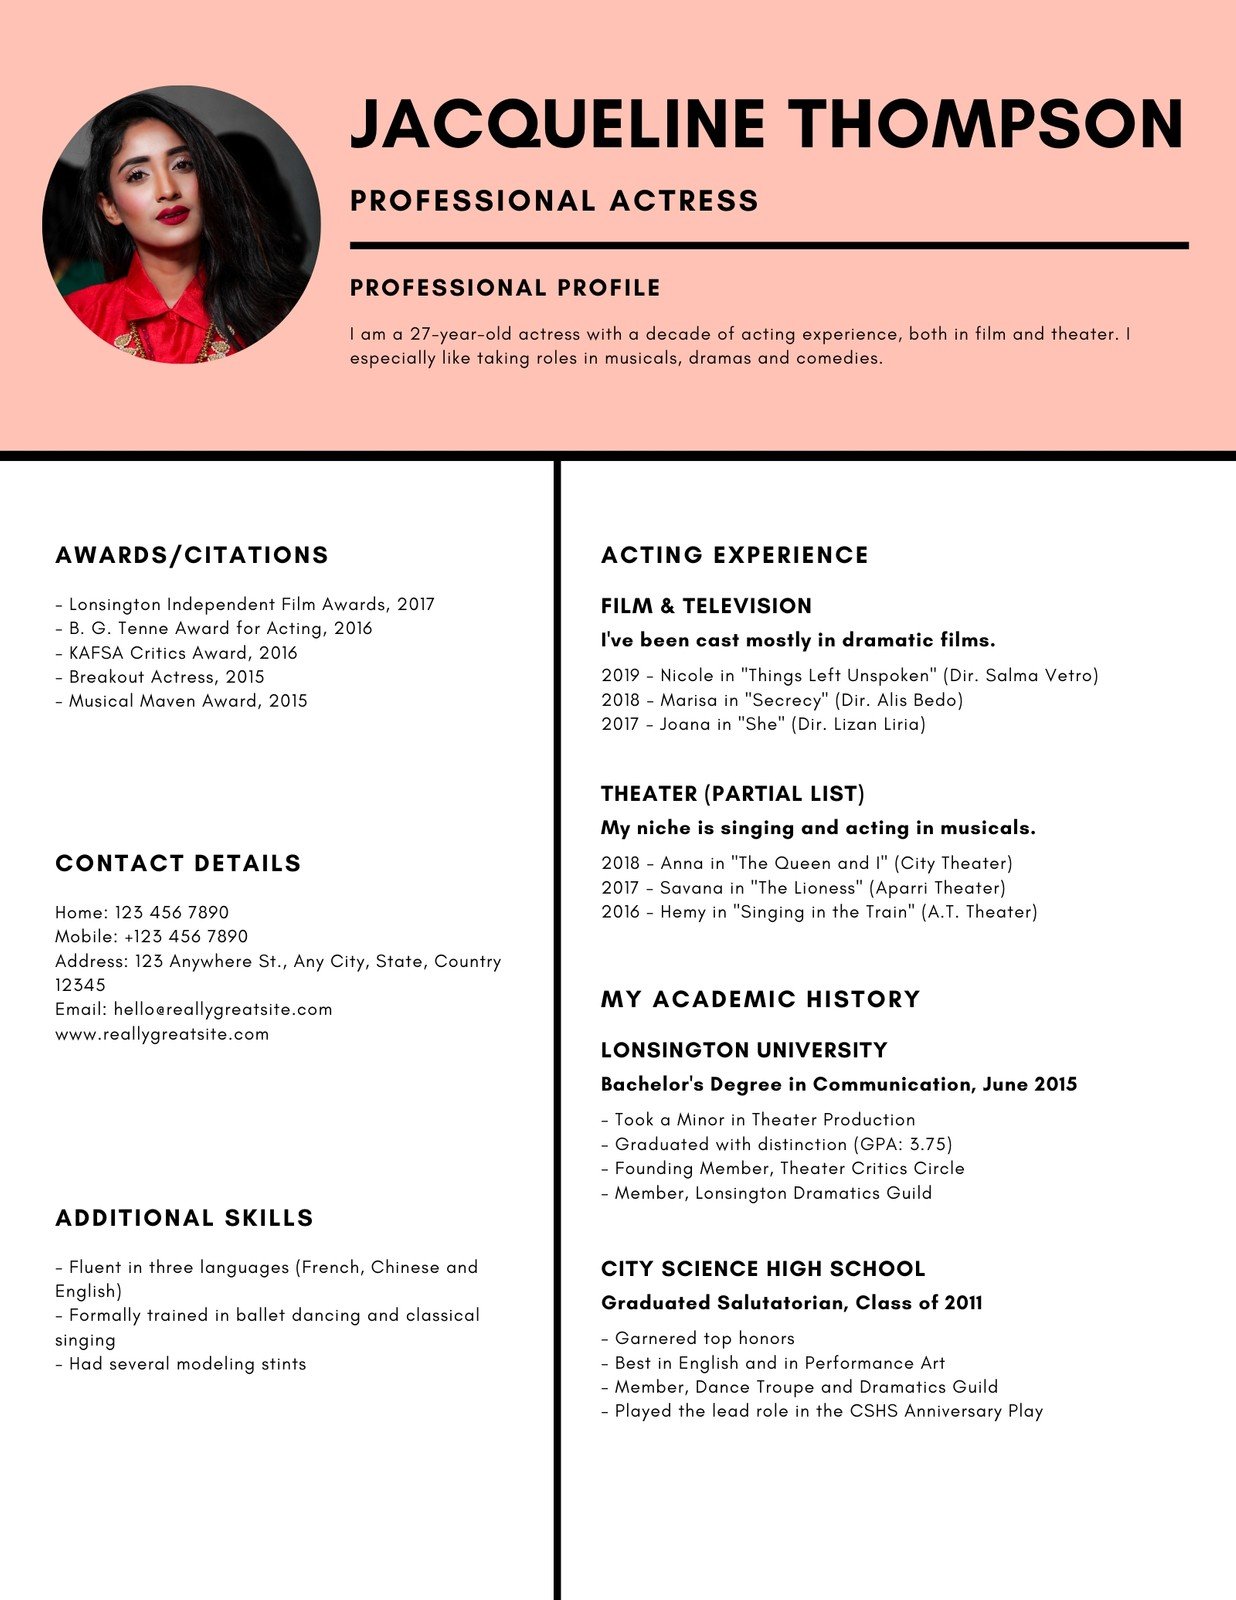 Customize 22+ Acting Resumes Templates Online - Canva Regarding Theatrical Resume Template Word